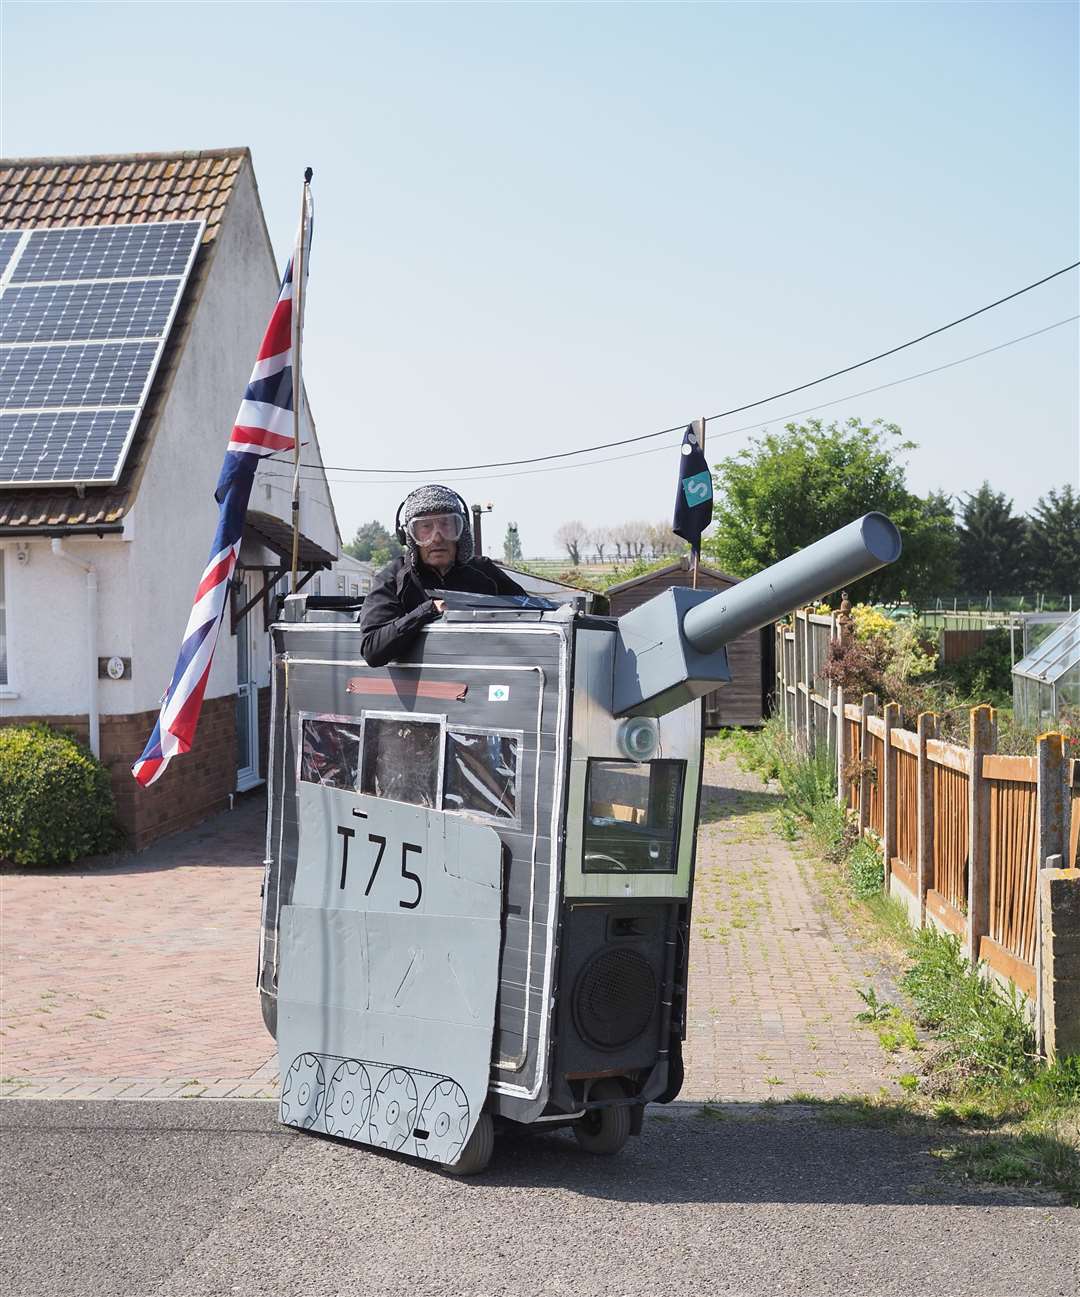 Sheppey pensioner Tim Bell, 75, marked the 75th anniversary of VE Day by decorating his mobility scooter as a tank. Pictured today ahead of the big day tomorrow. Picture: James Bell